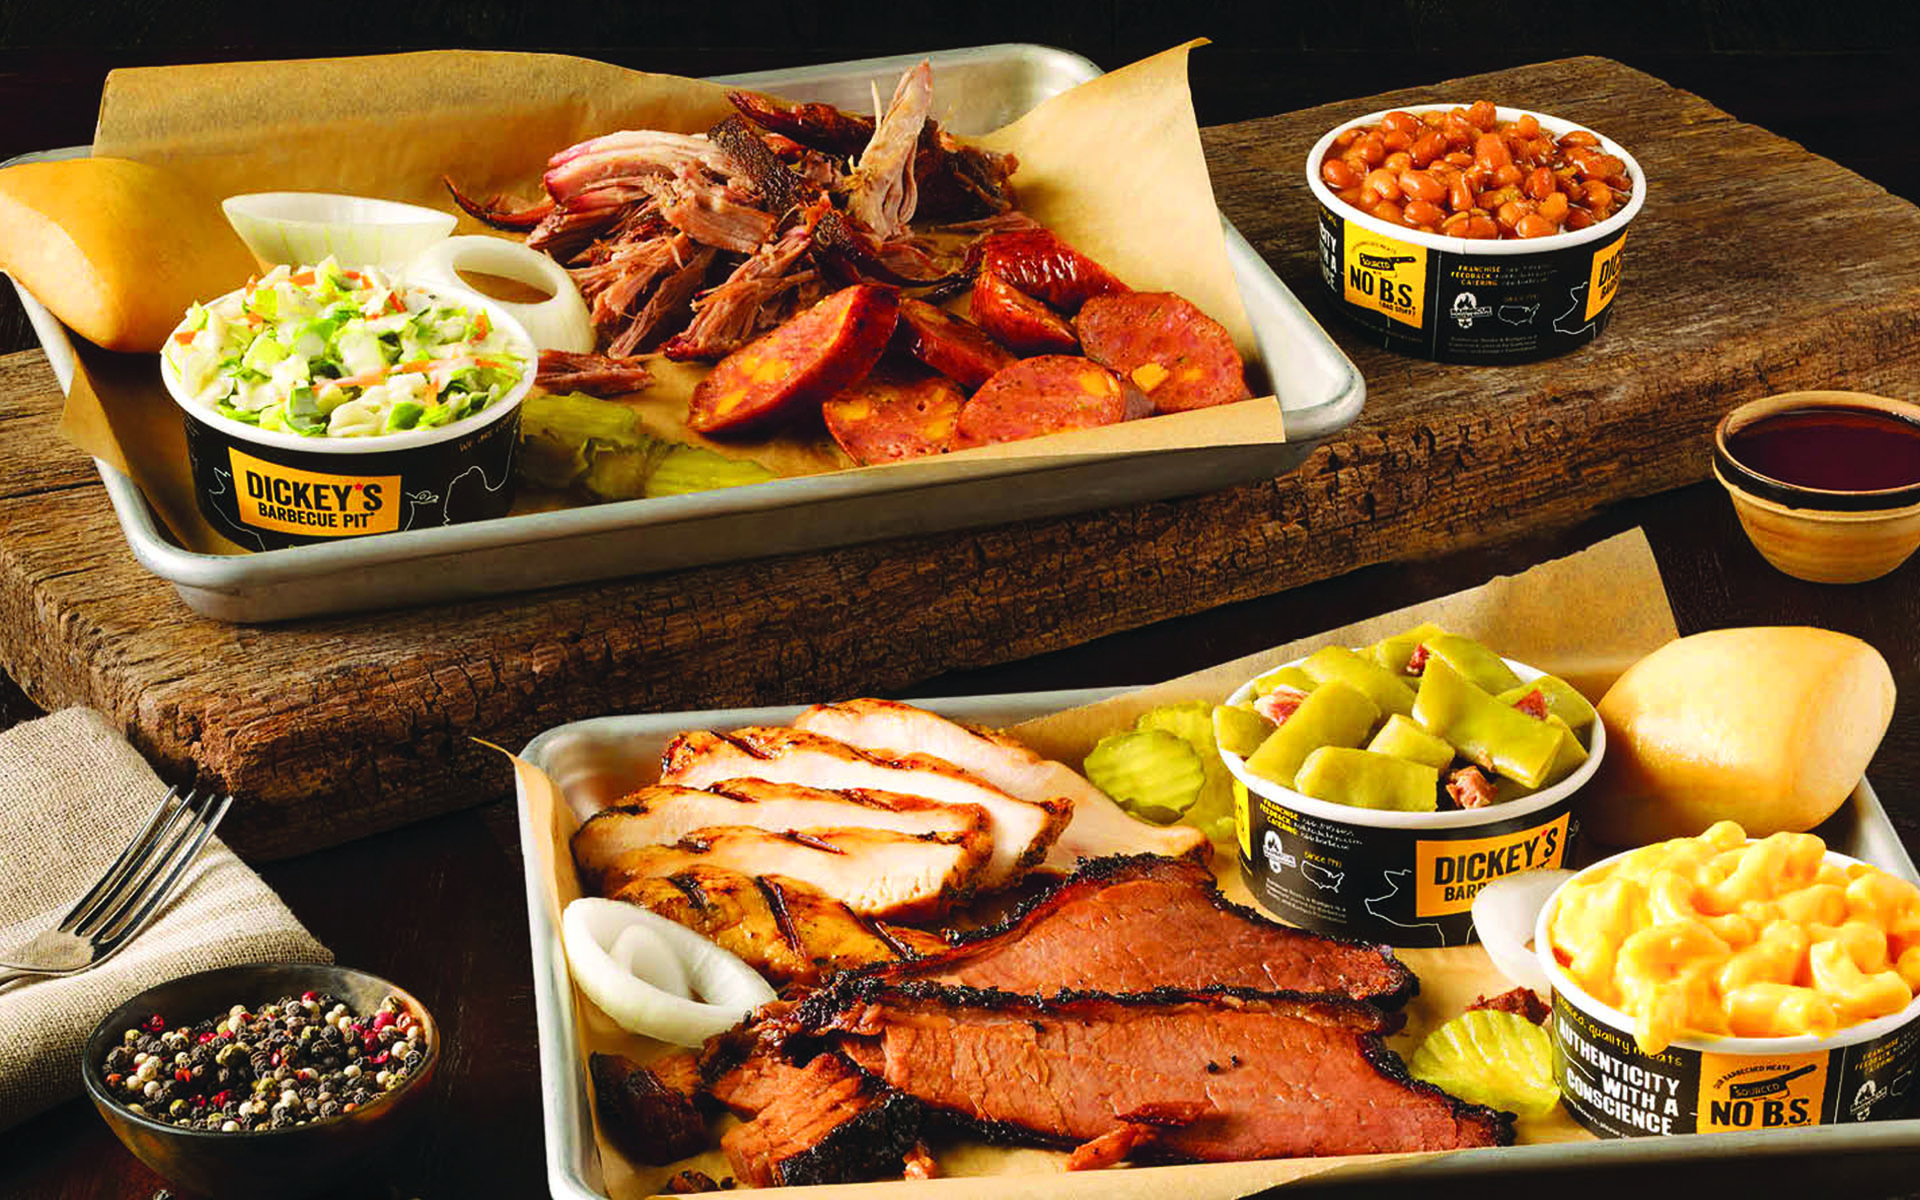 Dickey's Barbecue Pit in Meridian, ID at Restaurant.com